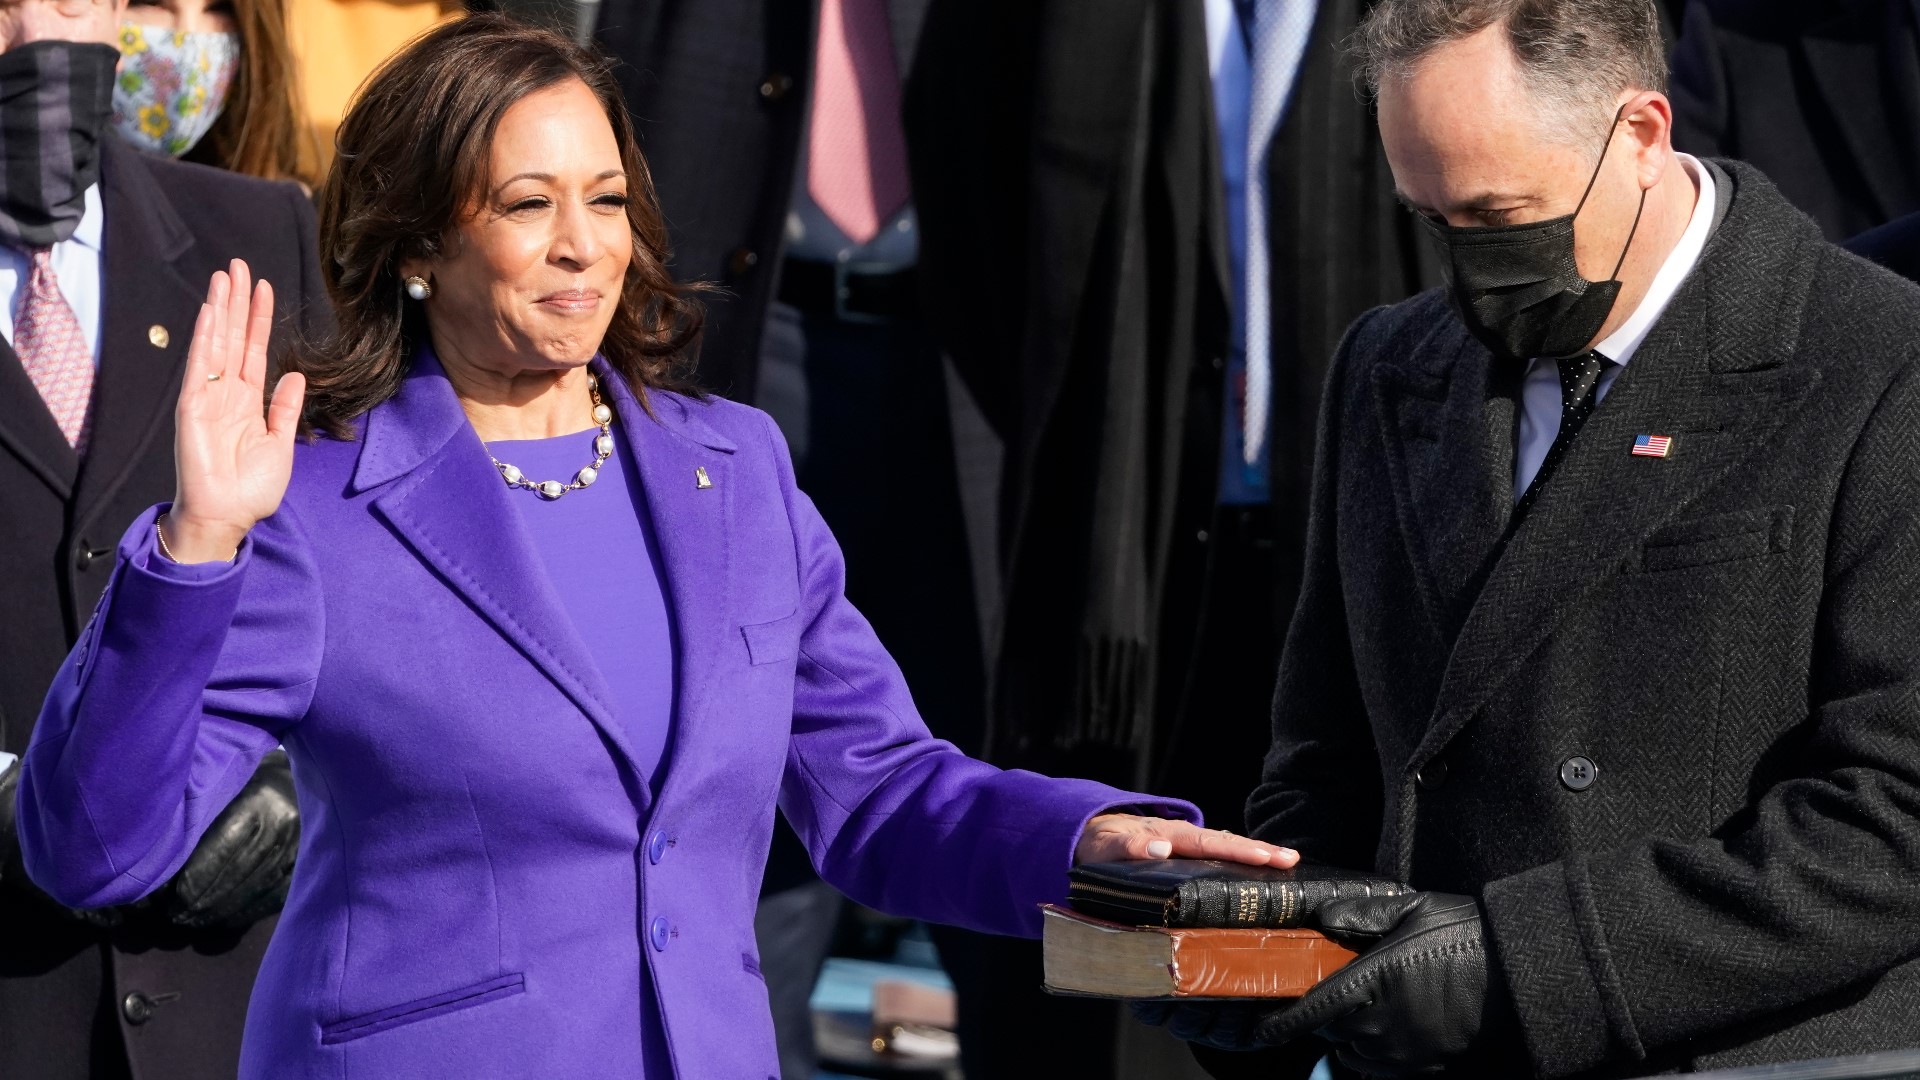 Vice President Kamala Harris was sworn in by Justice Sonia Sotomayor at the 2021 inauguration.